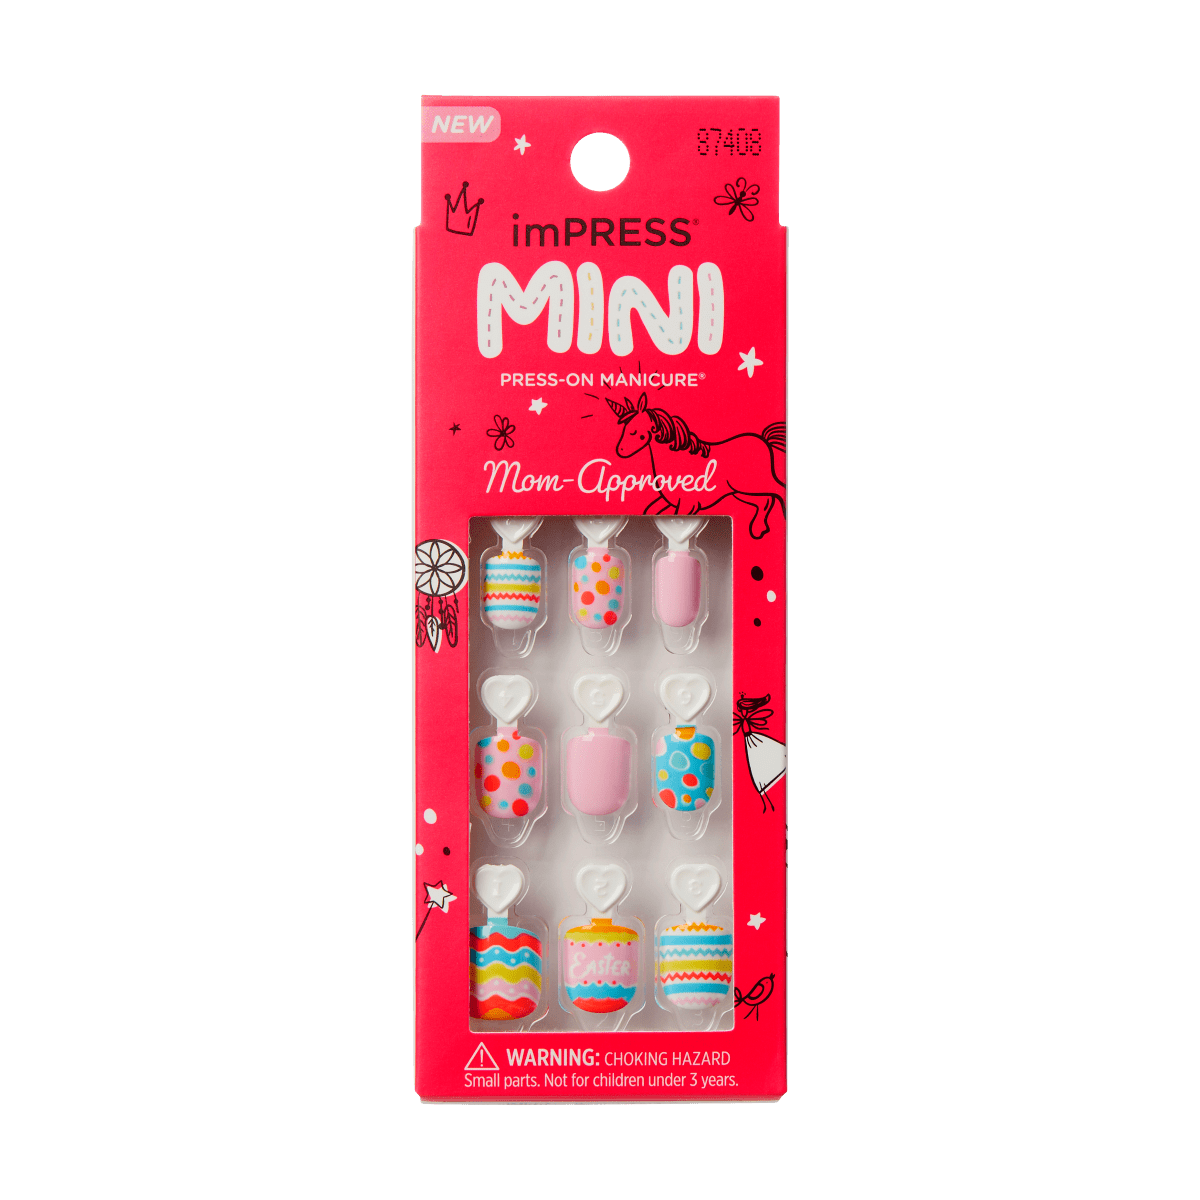 imPRESS MINI Press-On Manicure for Kids - Spring Song